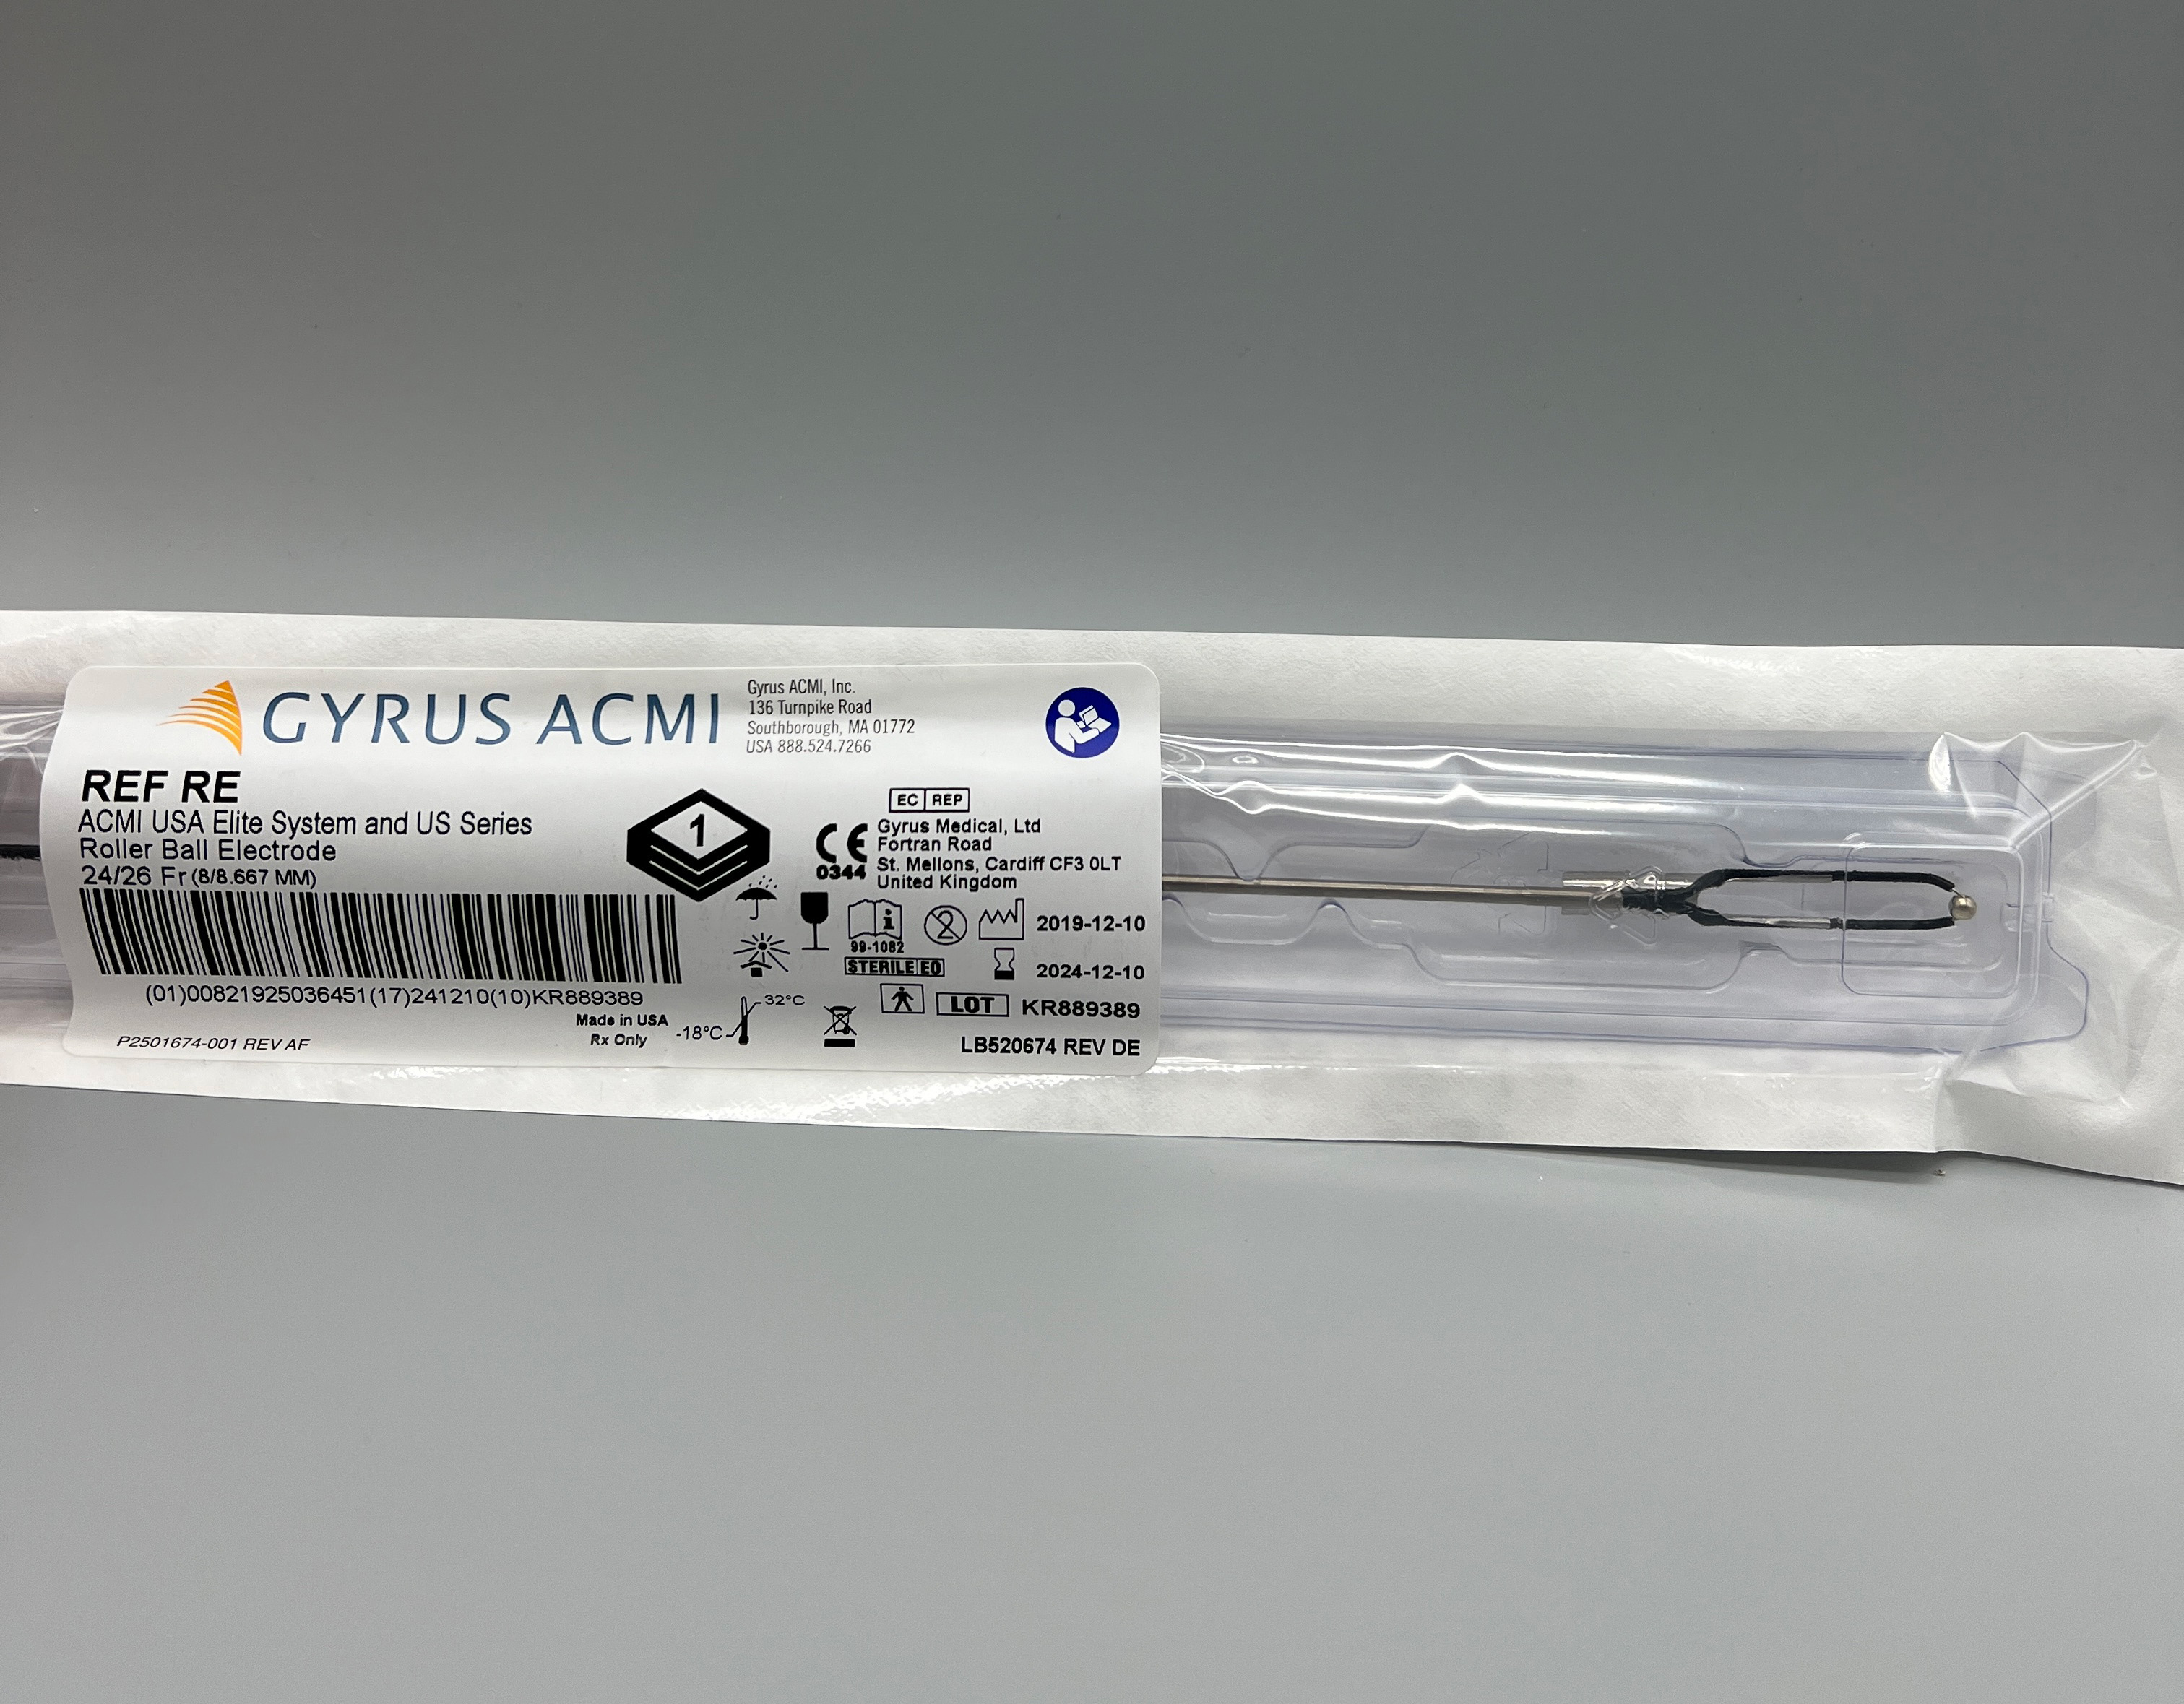 GYRUS ACMI USA ELITE SYSTEM AND US SERIES ROLLER BALL ELECTRODE